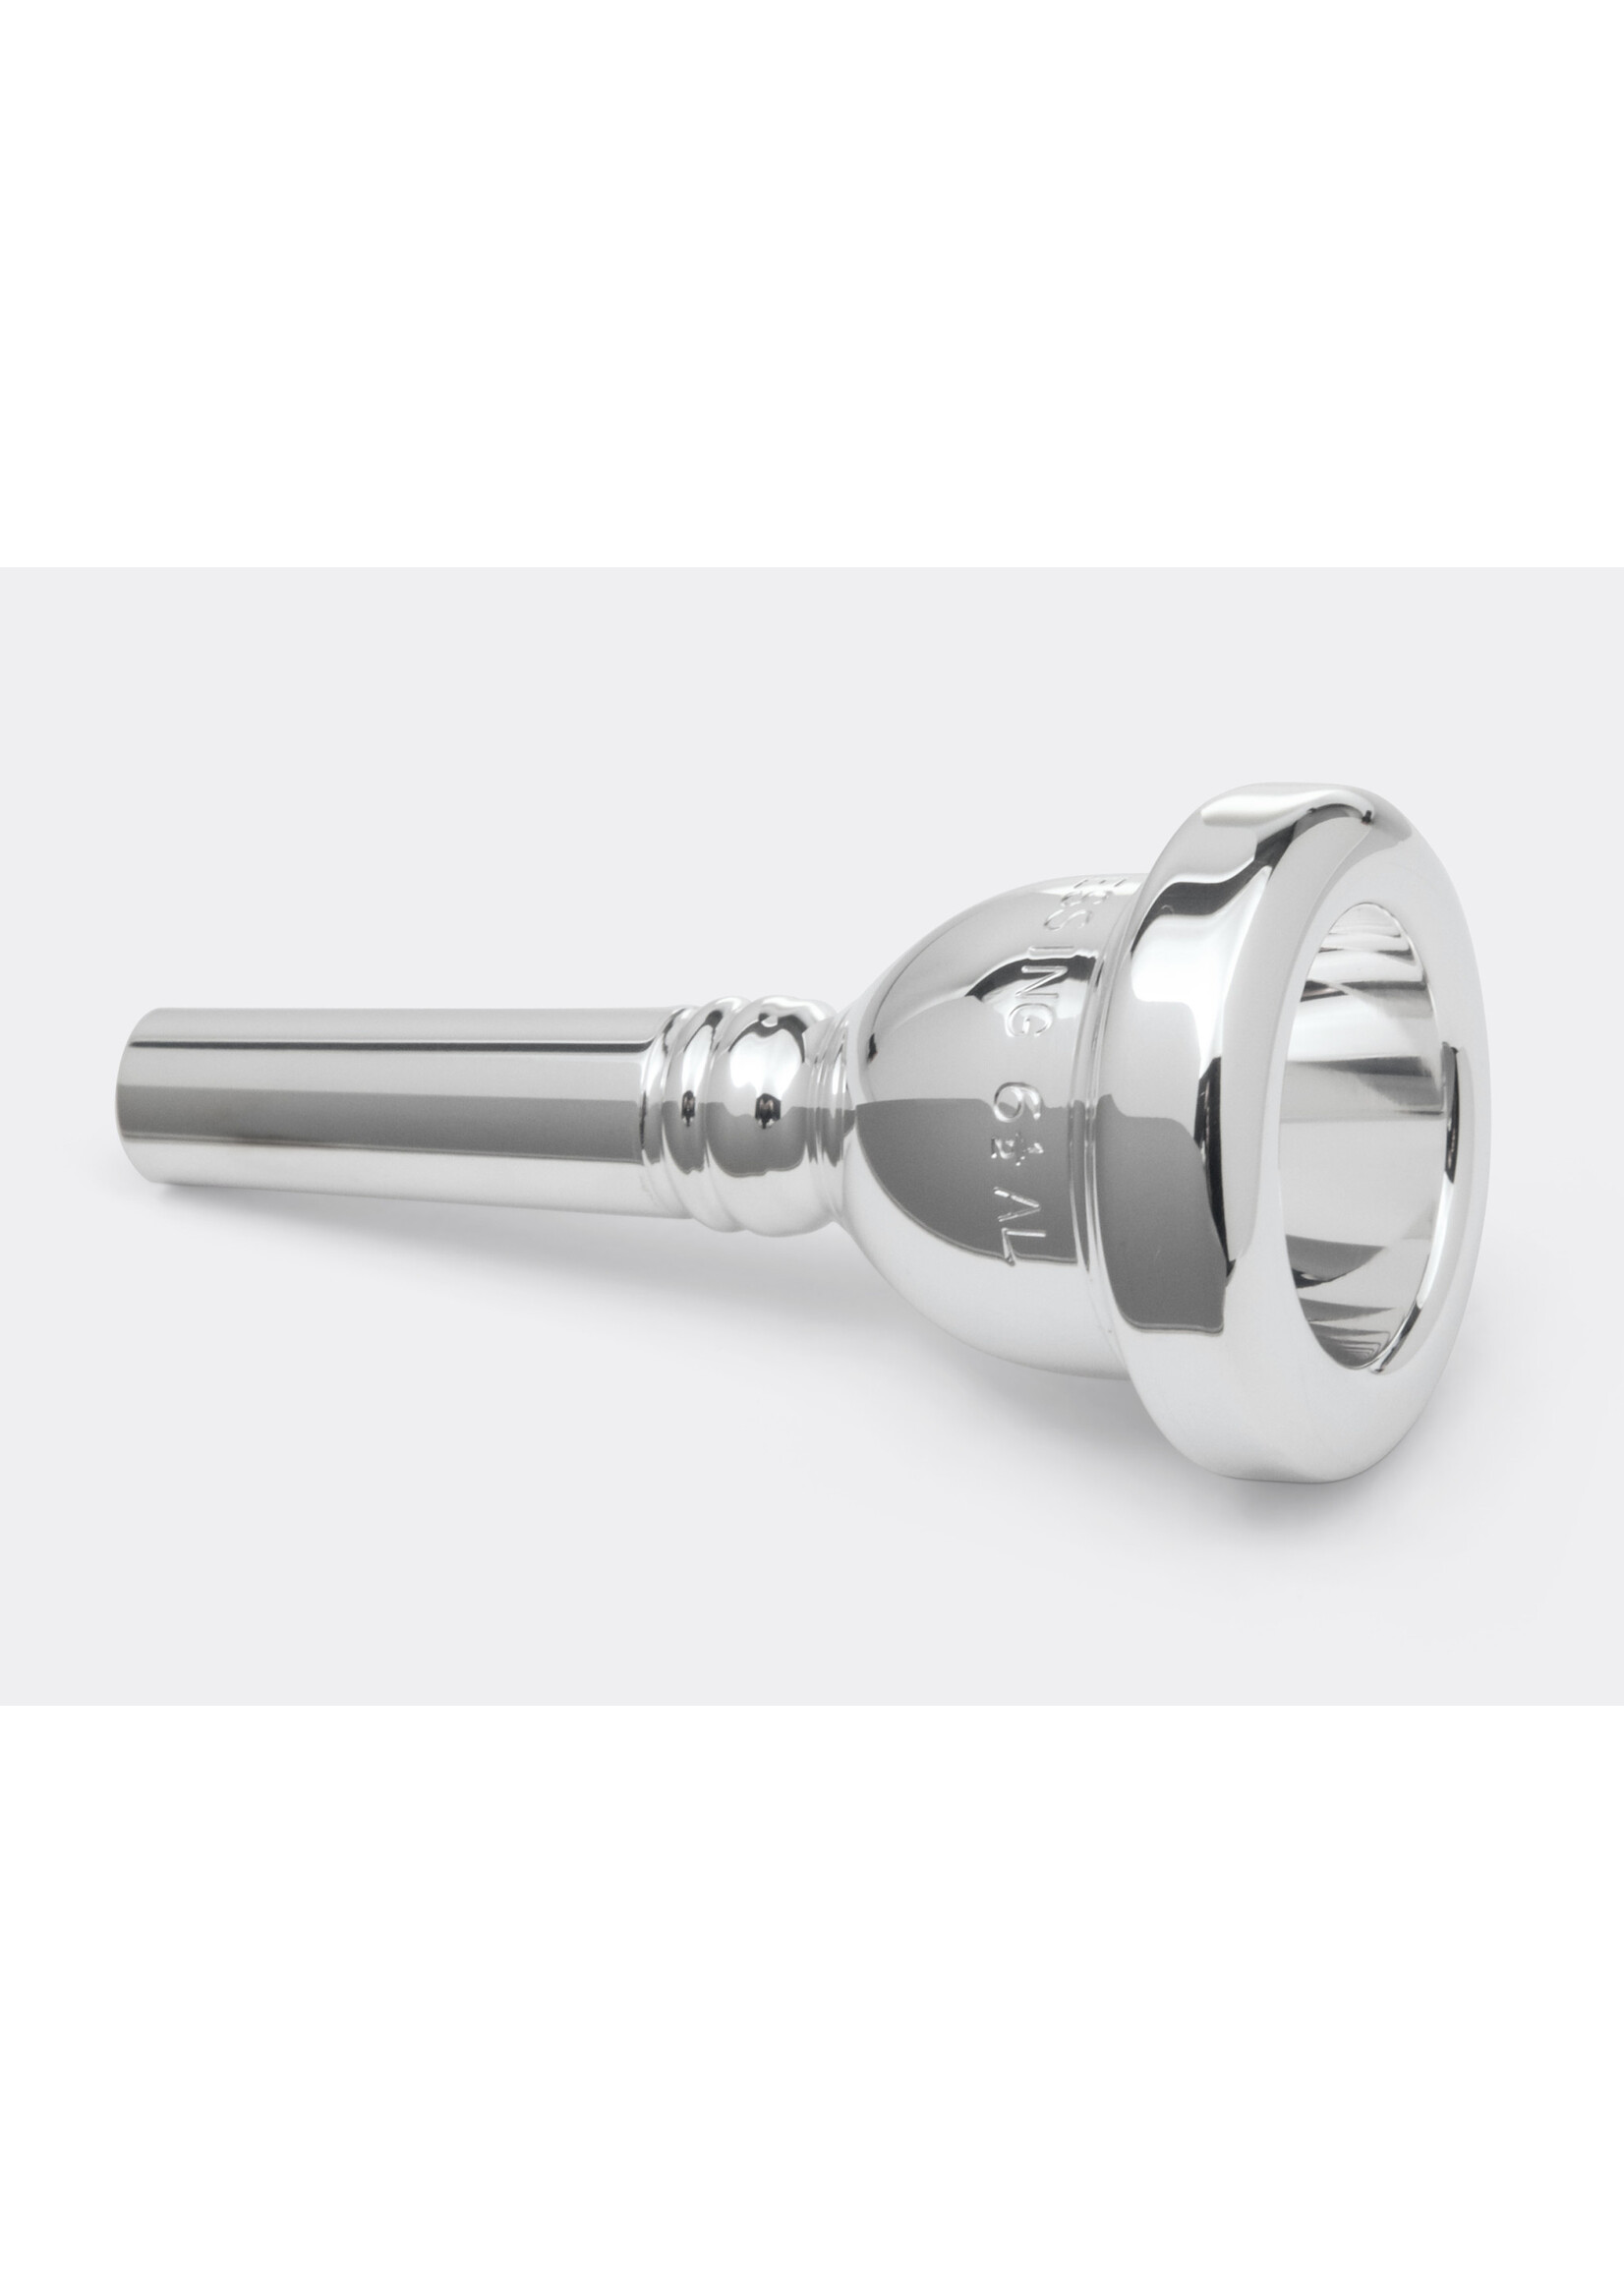 Blessing Blessing 6.5AL Trombone Mouthpiece, Small Shank, Silver